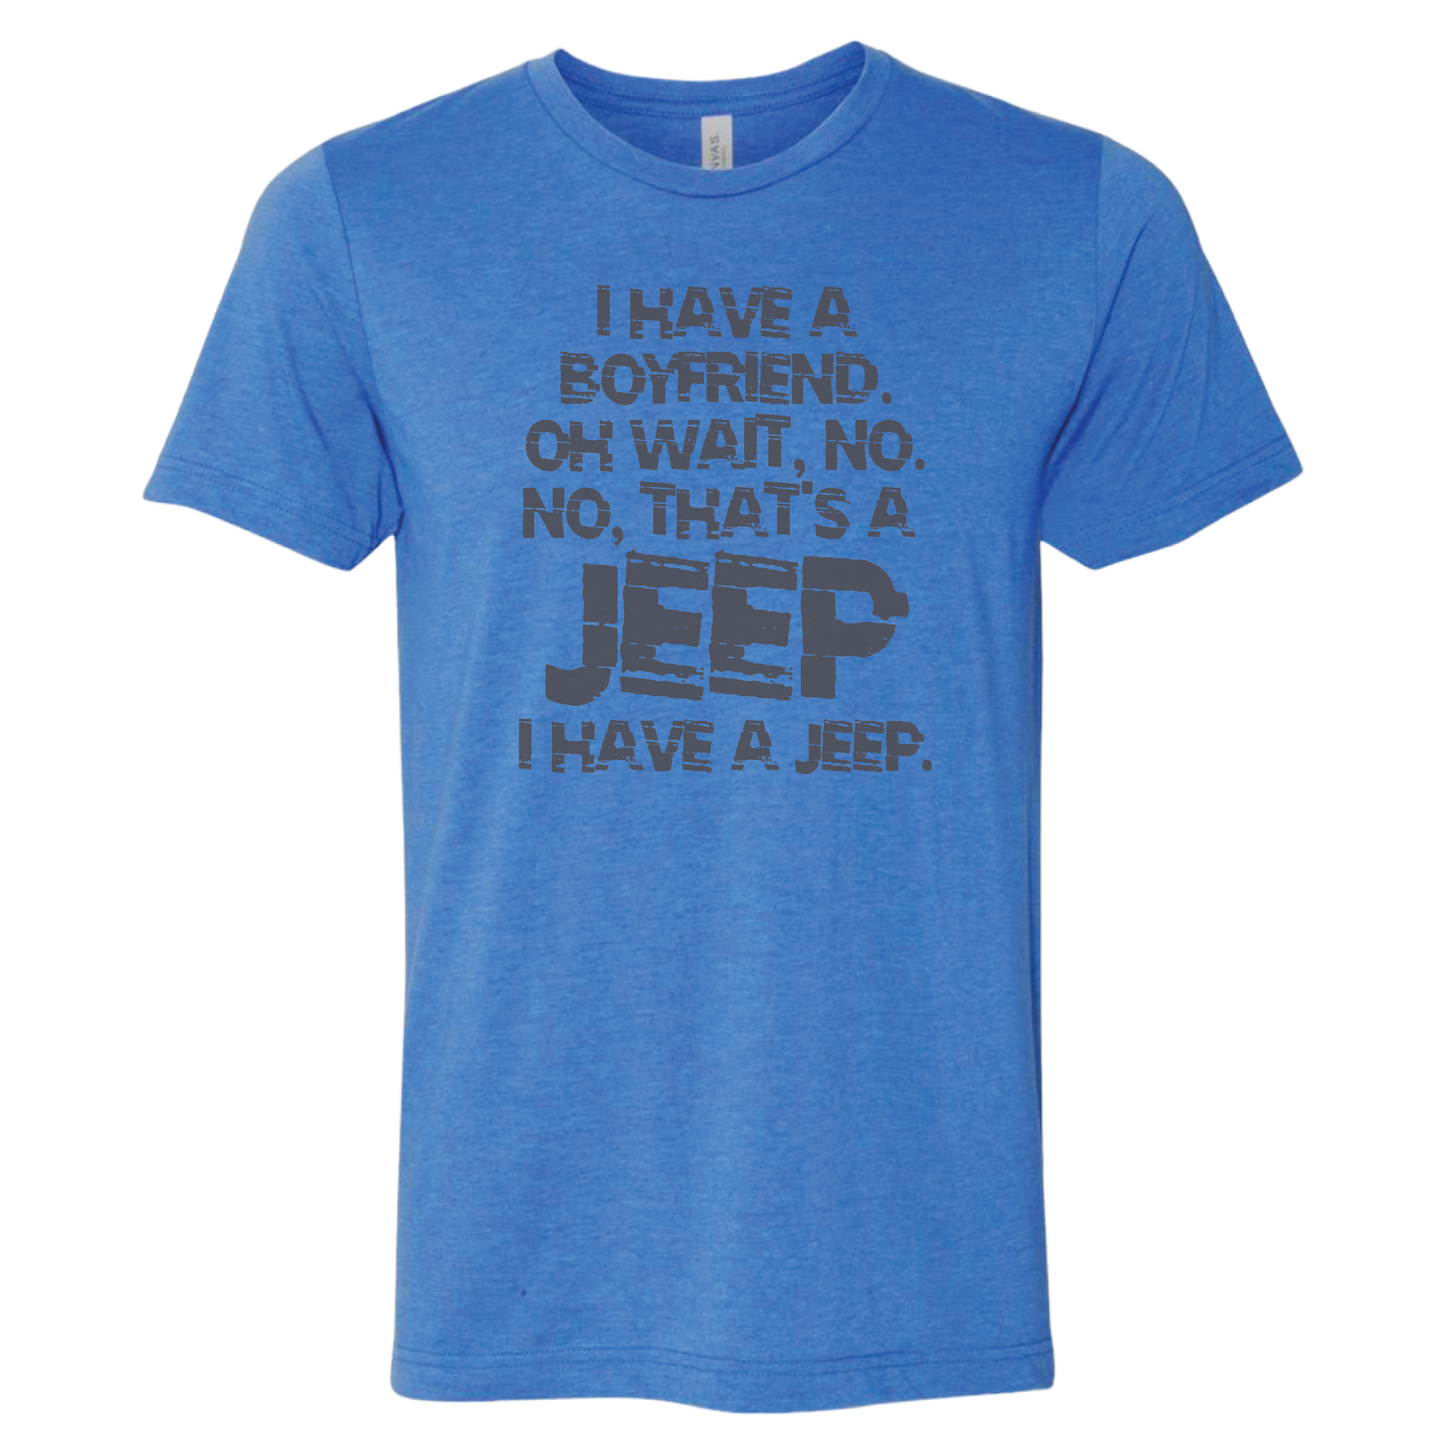 I Have a Boyfriend - Shirt, Tank Top, Long Sleeve or Hoodie - Available in Multiple Colors